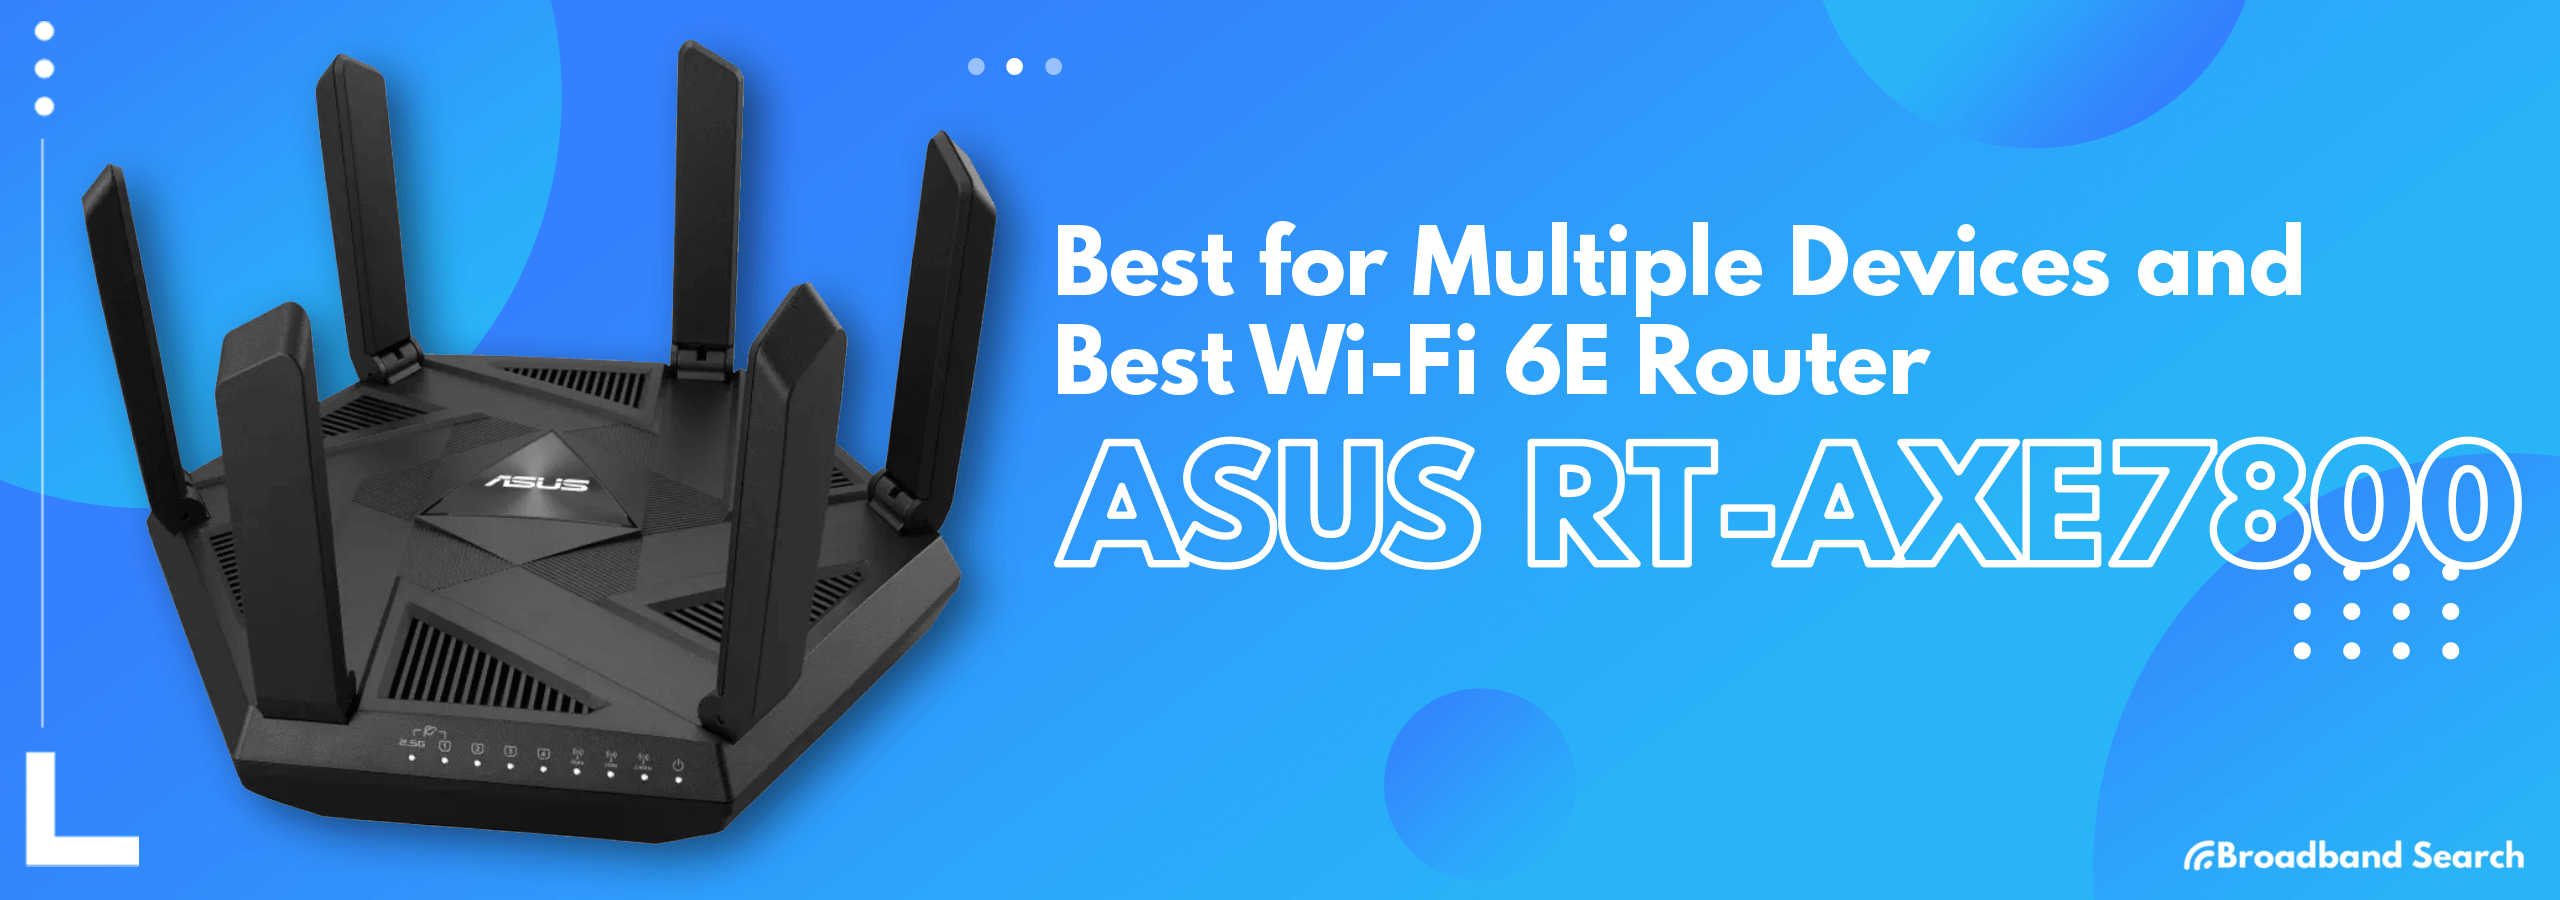 Best wifi routert for multiple devices and best wifi 6e router